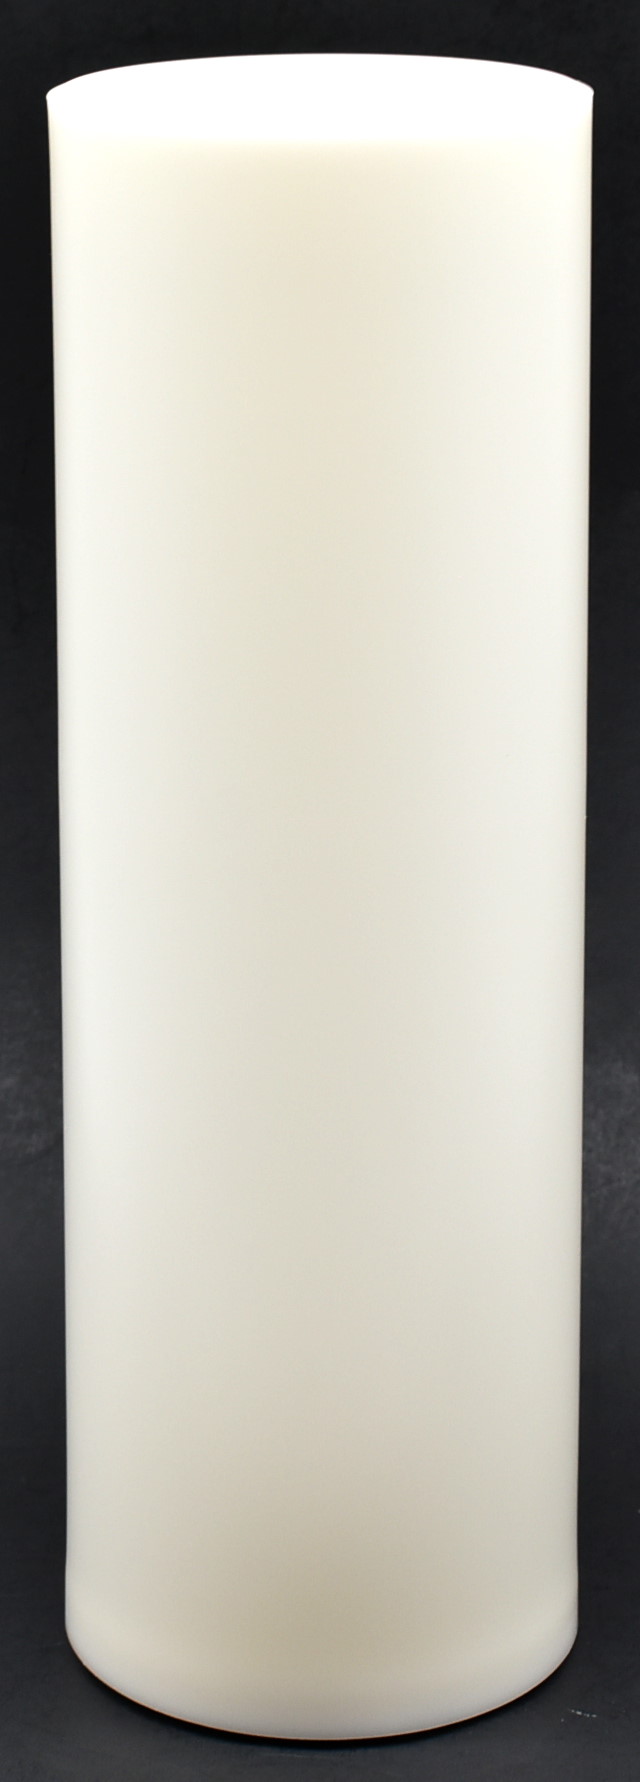 CANDLE, FLAMELESS, 4X12, WHITE,  OUTDOOR, PLASTIC, NO SHRINKWRAP